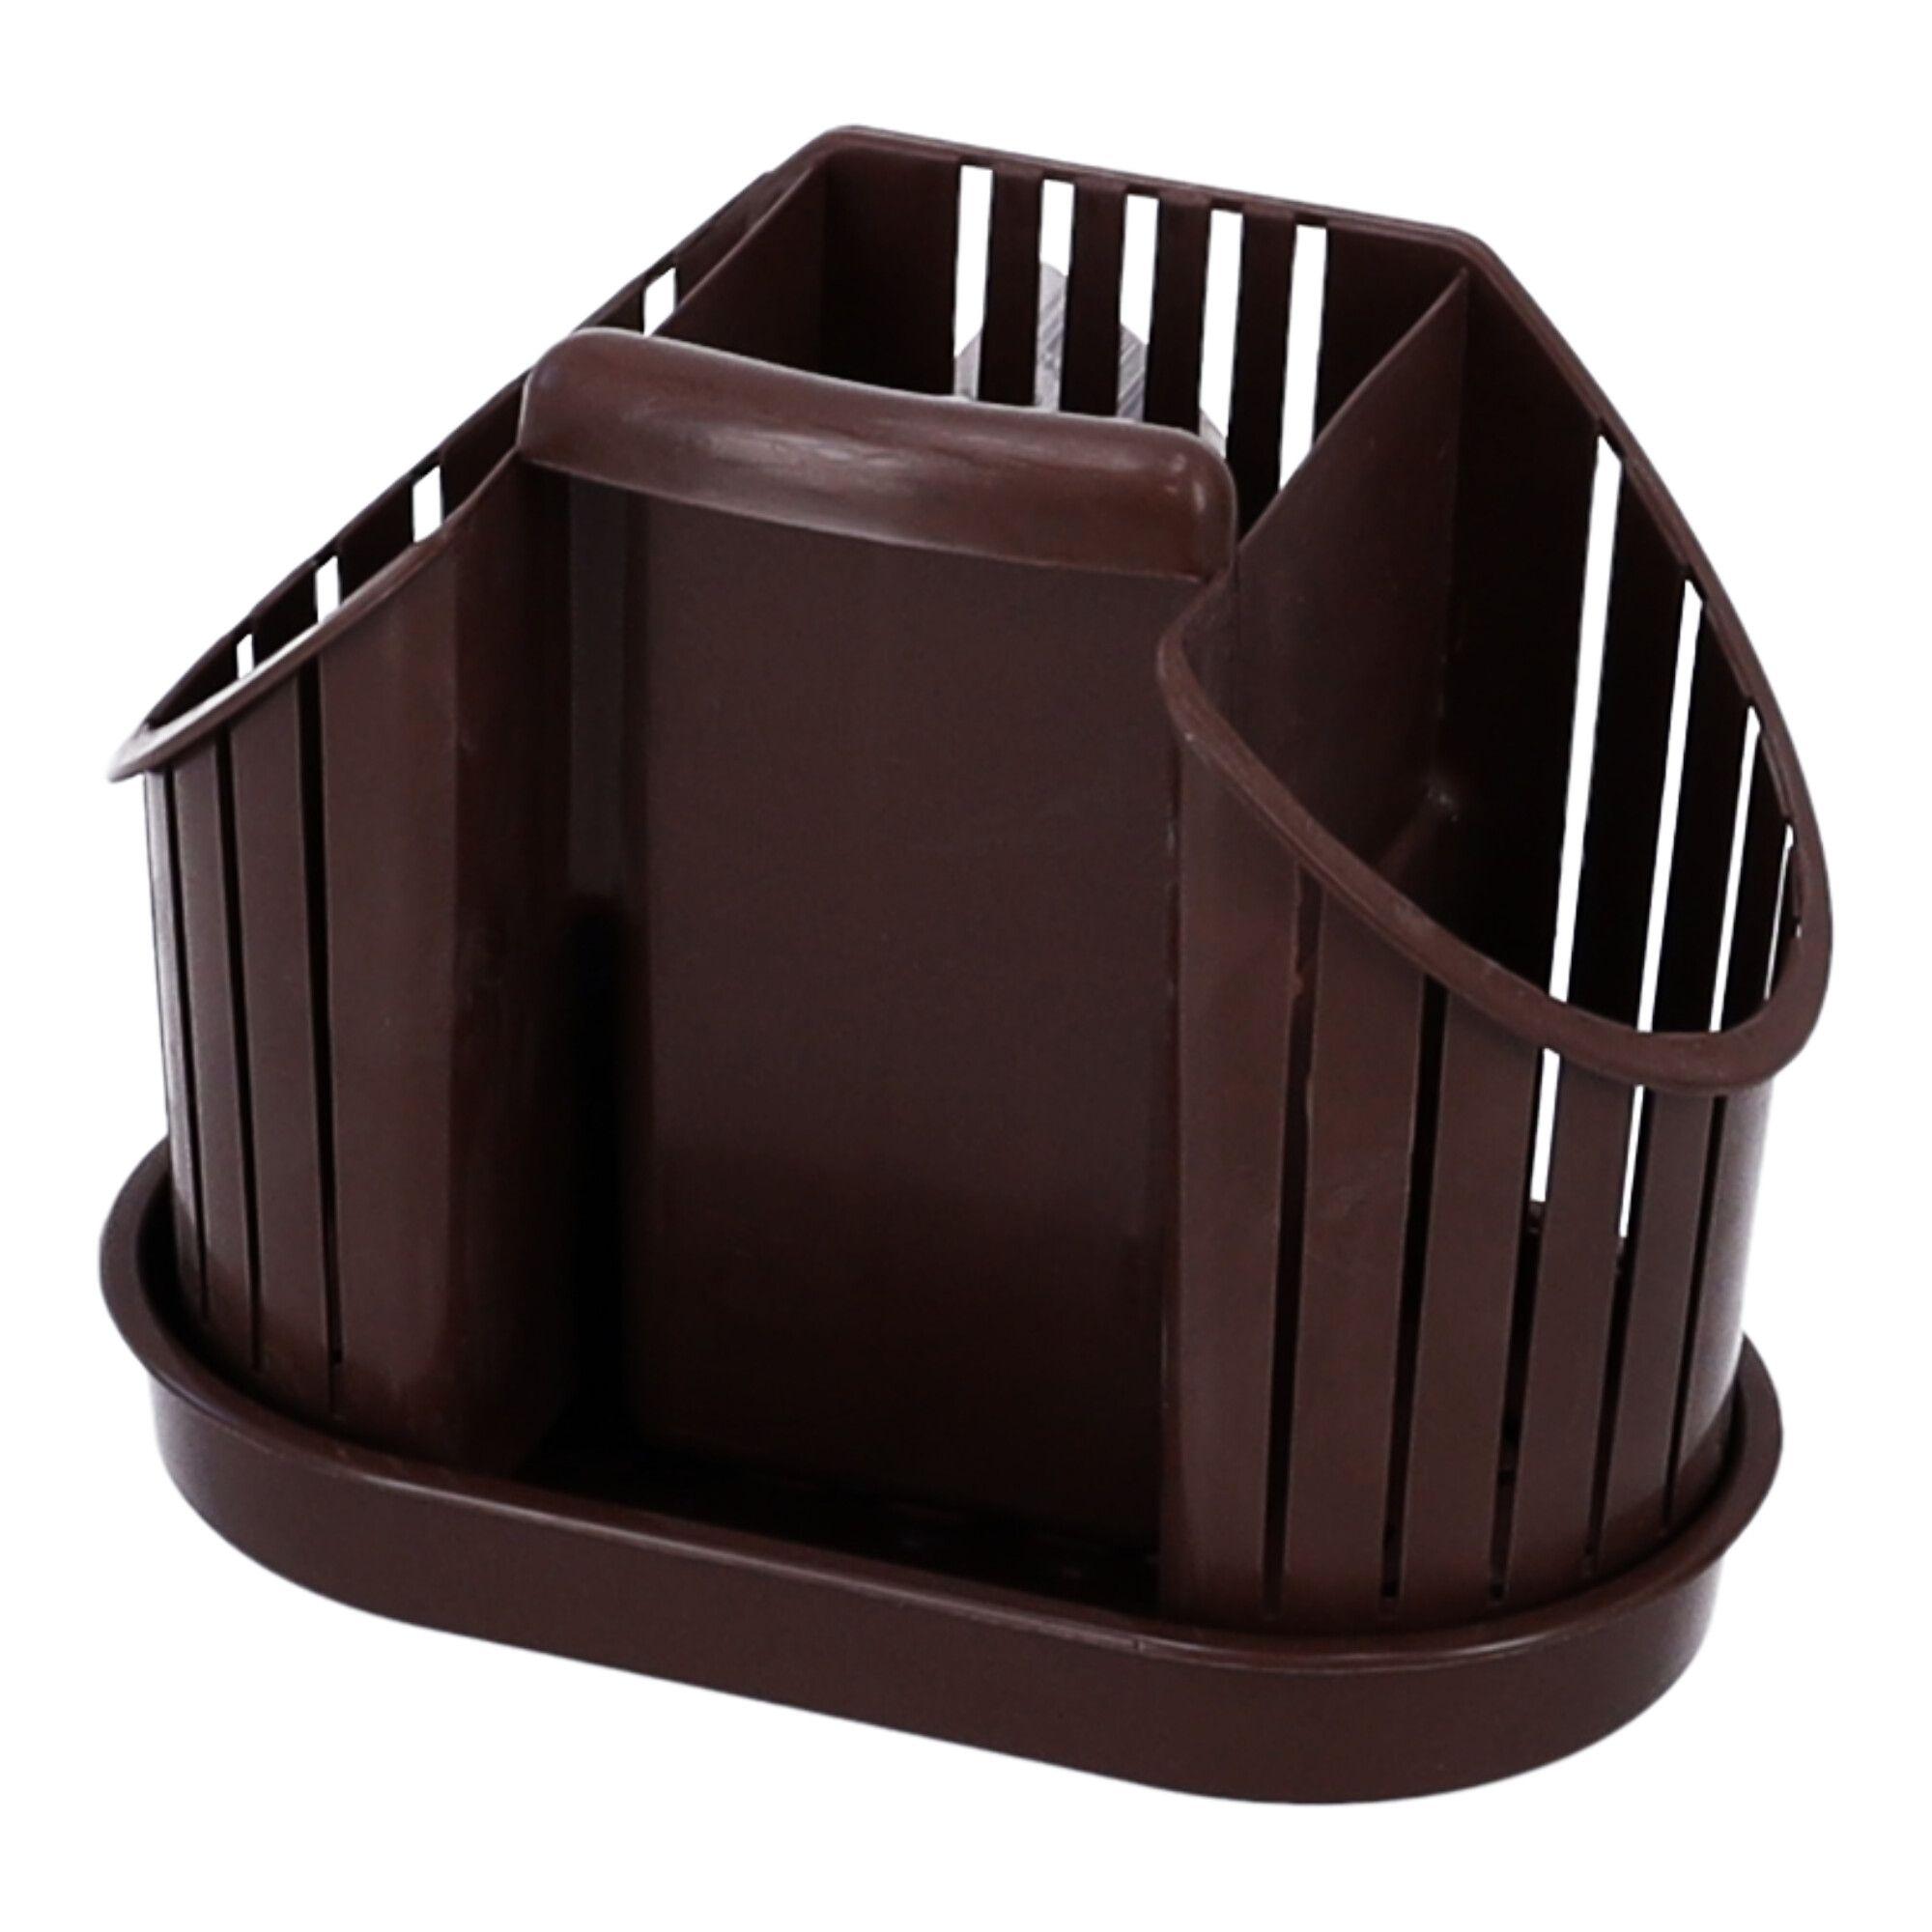 Cutlery drainer with stand, POLISH PRODUCT